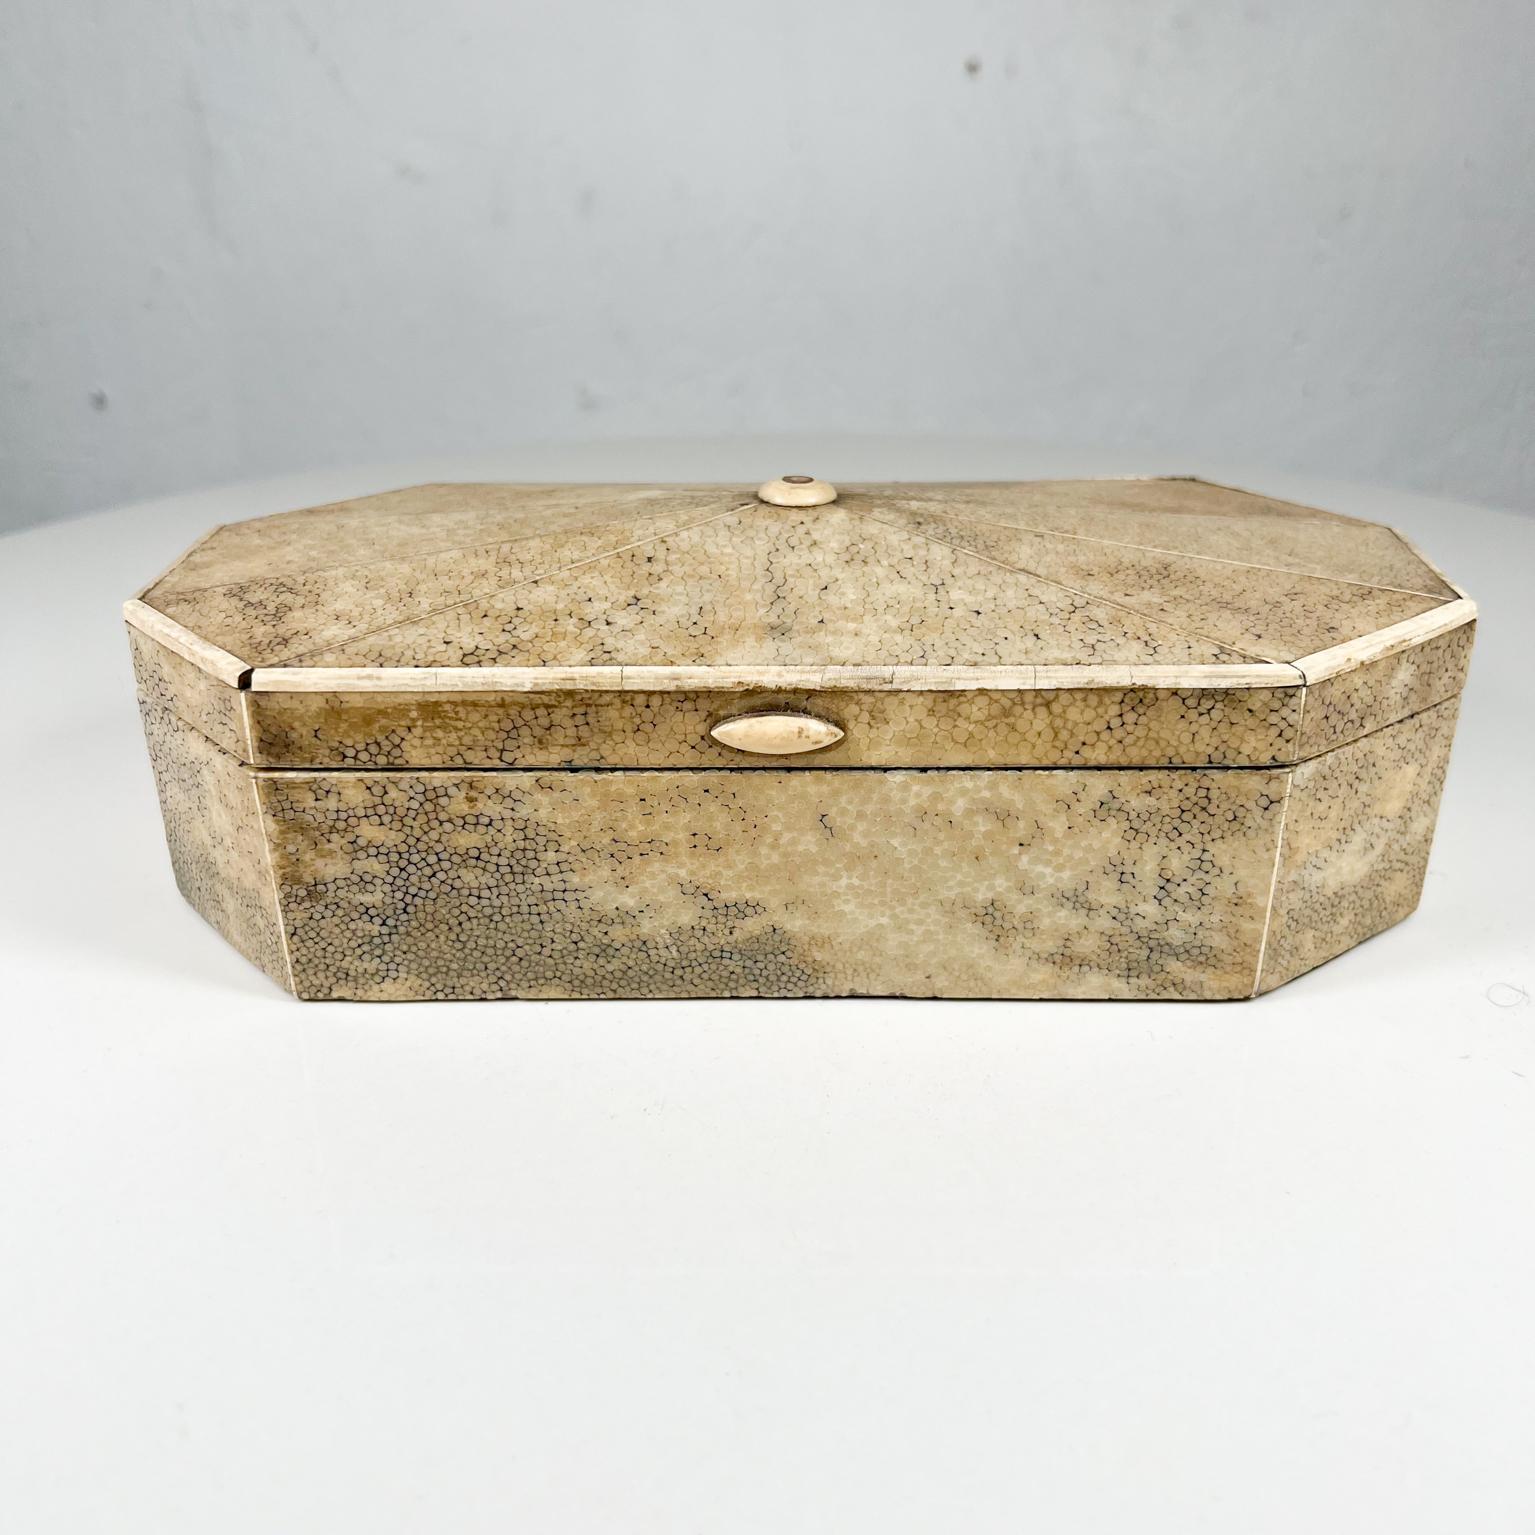 1930s Art Deco elegance Shagreen Trinket Keepsake Box Stingray Leather Wood interior
8.5 w x 3.88 d x 2.75 tall
Fabulous design in the style of Jean Michel Frank.
No label present.
Original preowned vintage condition. Some trim on edge missing.